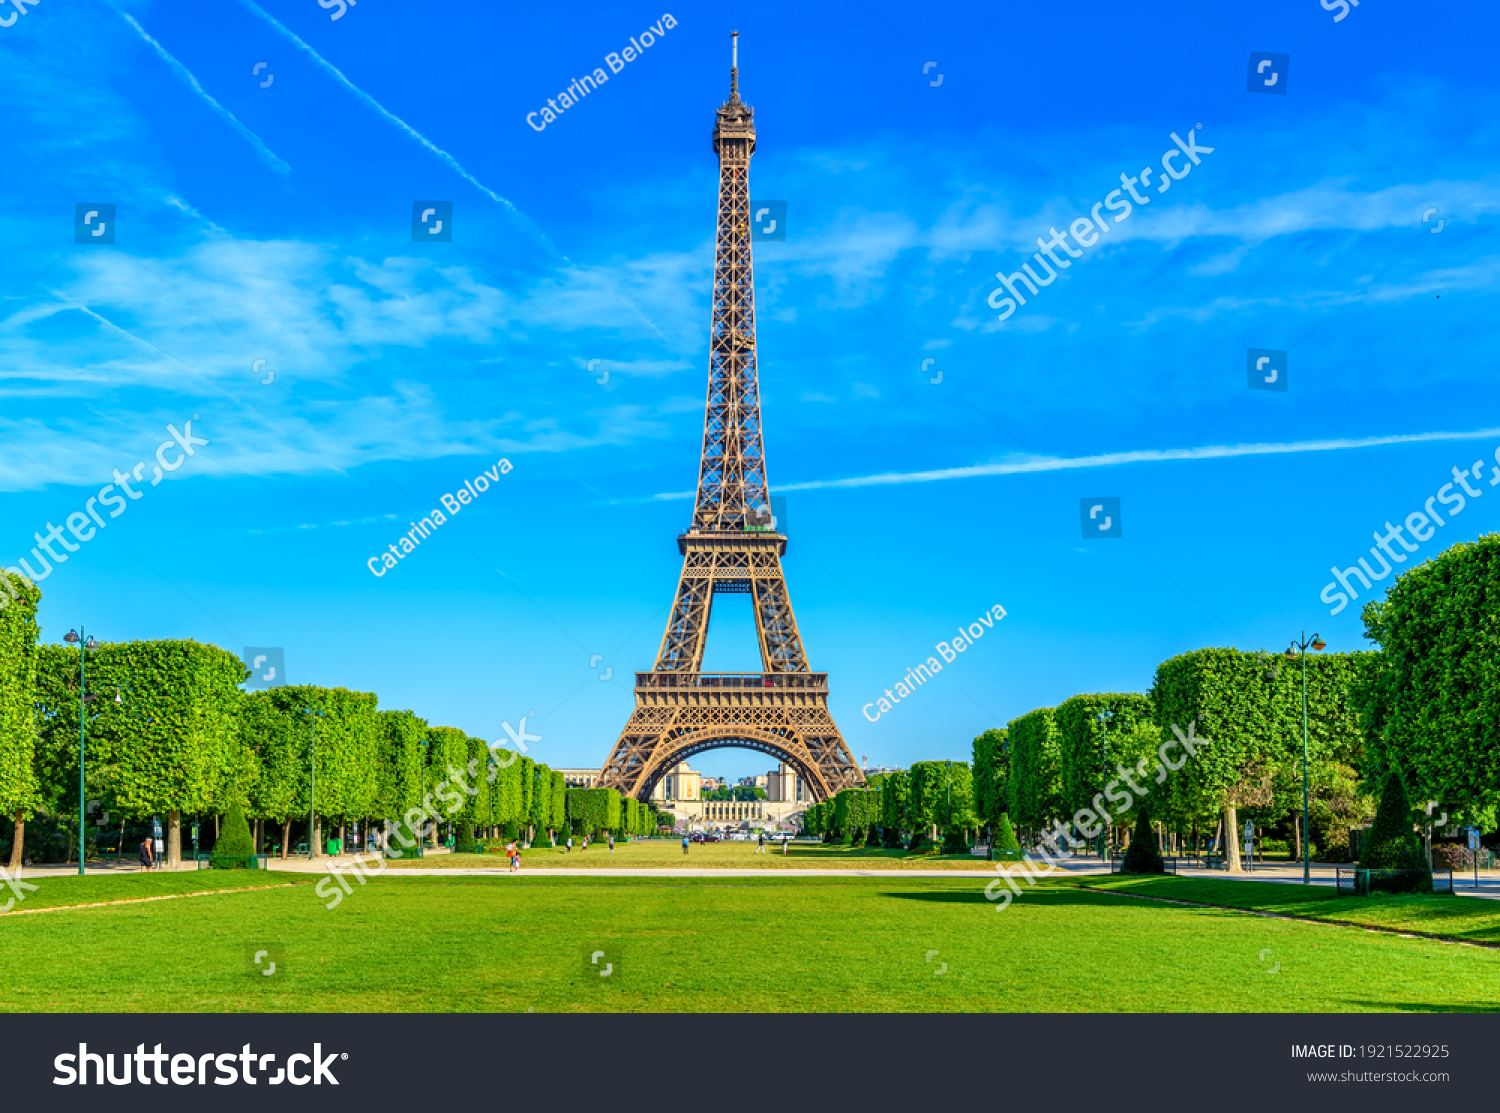 Paris Eiffel Tower and Champ de Mars in Paris, France. Eiffel Tower is one of the most iconic landmarks in Paris. The Champ de Mars is a large public park in Paris #1921522925